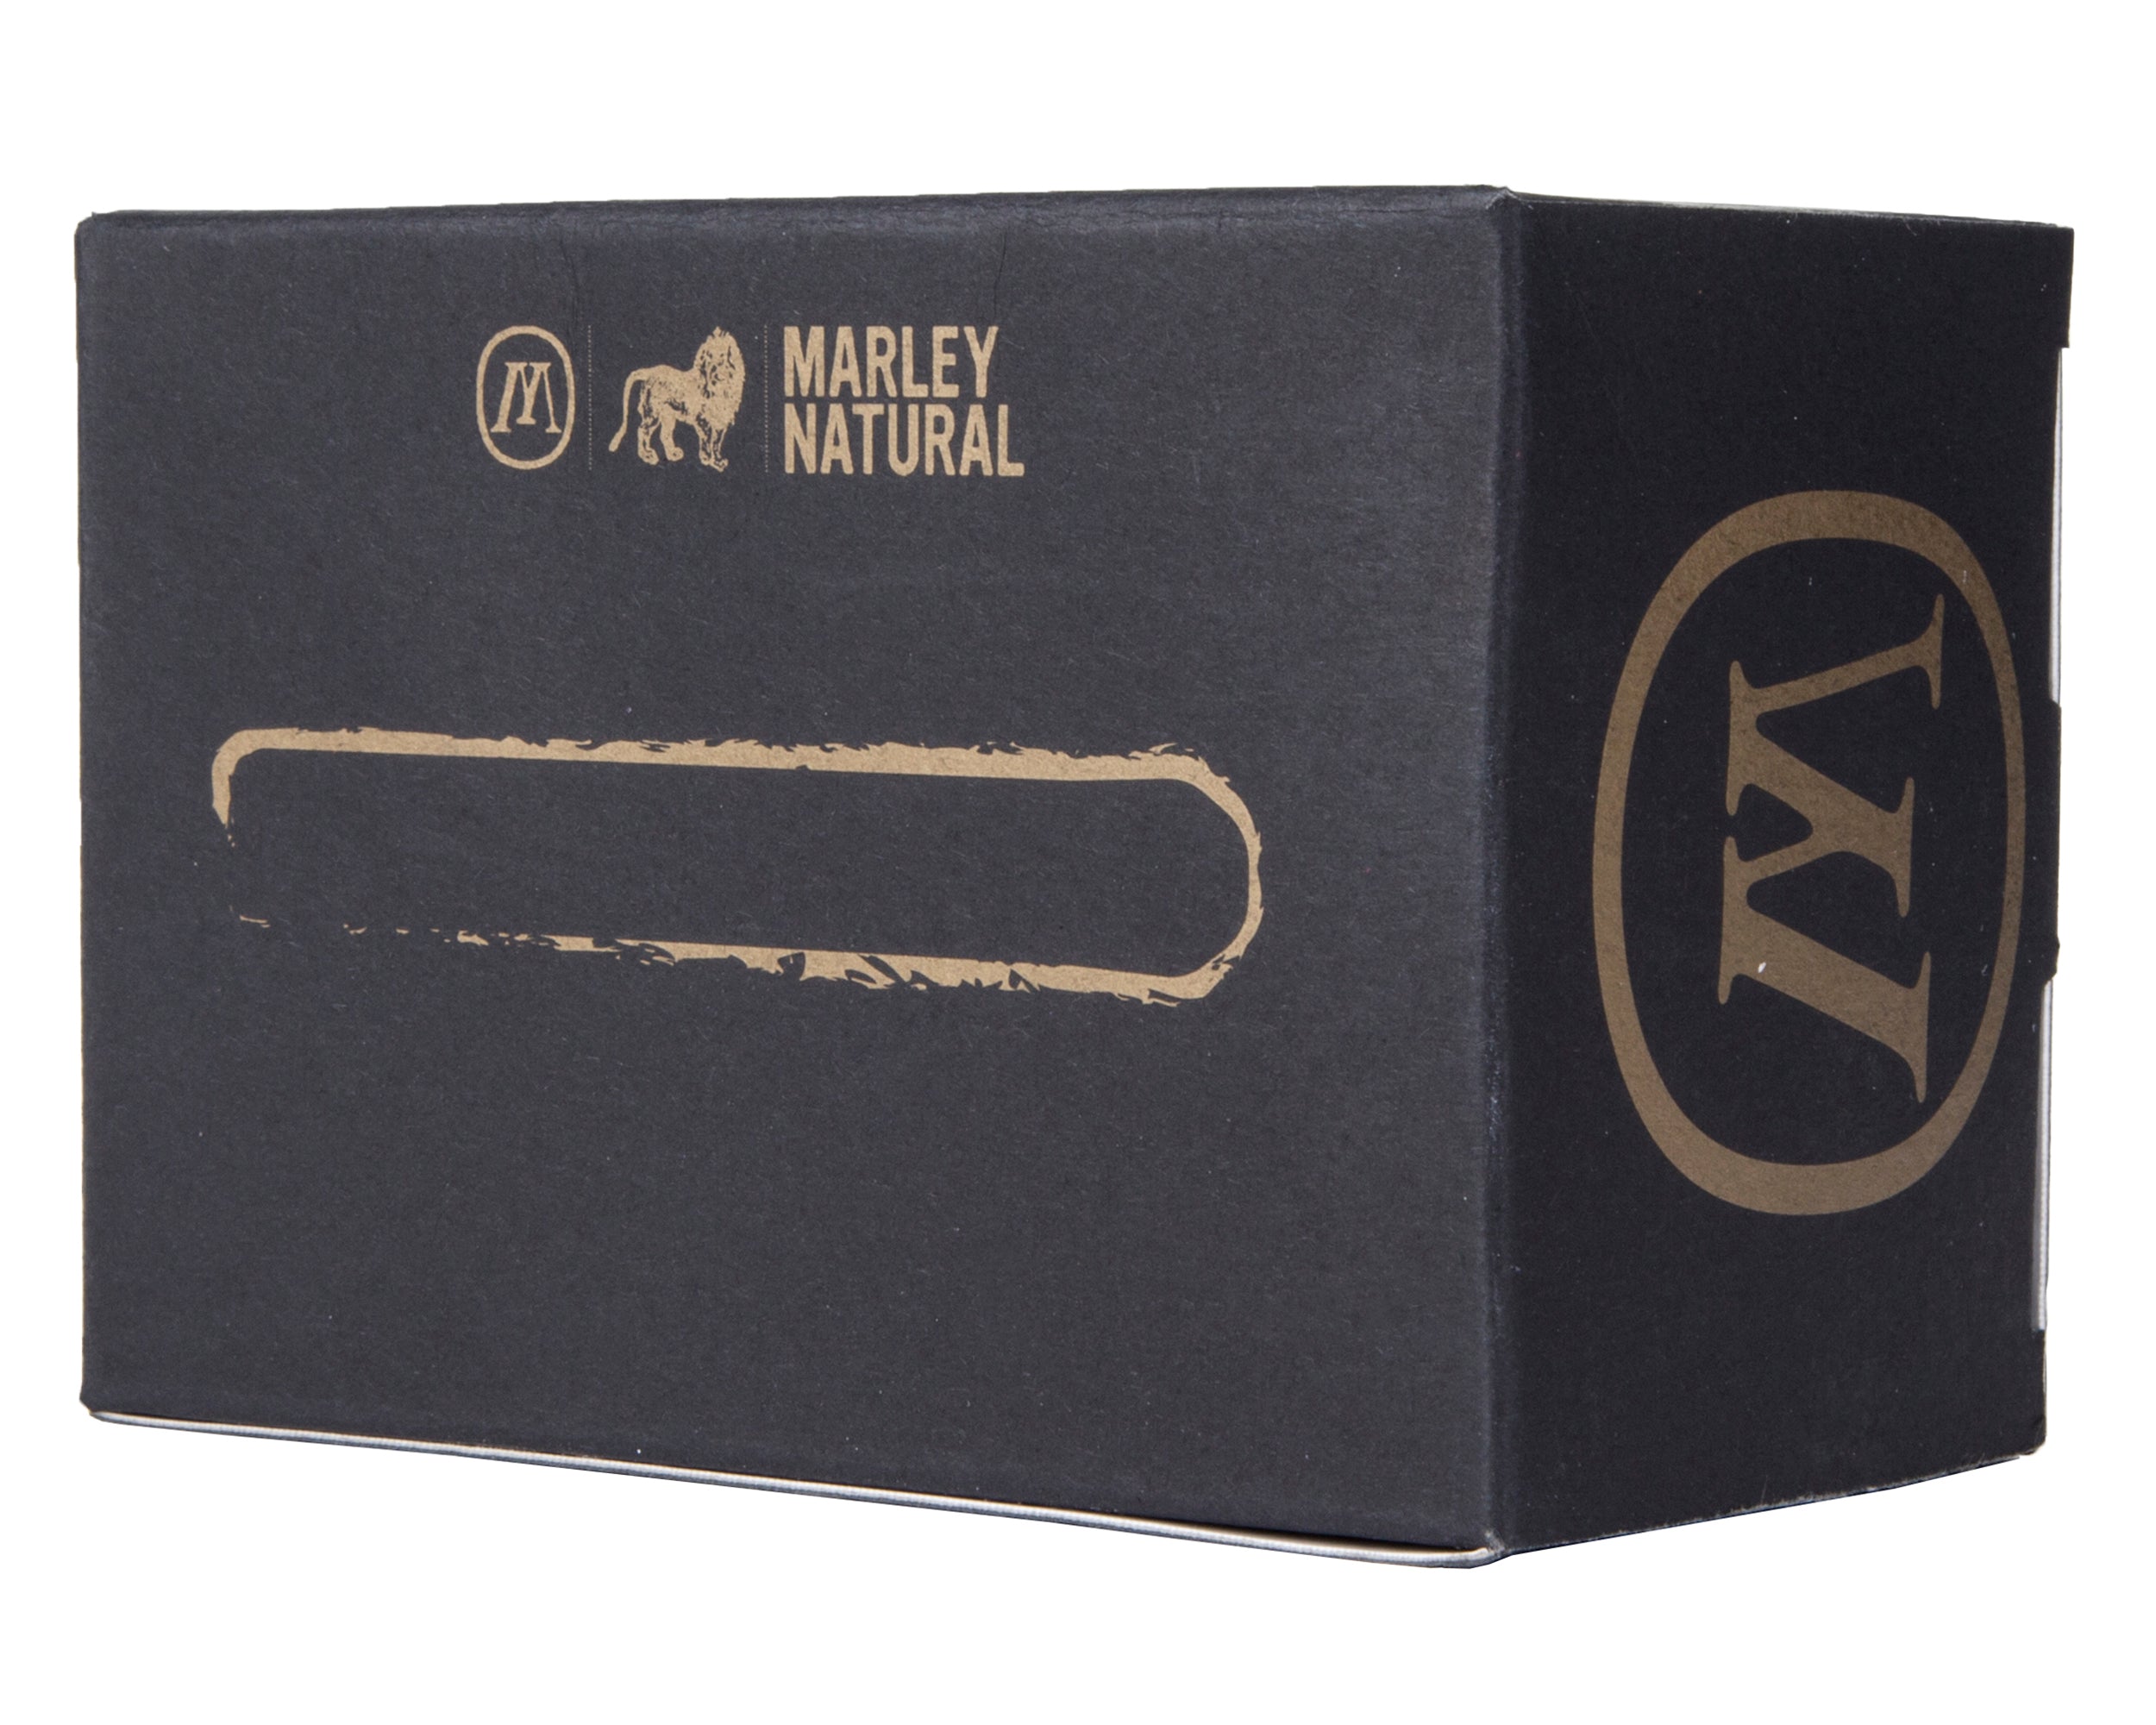 Marley Natural | Glass Taster Chillum Hand Pipe | 4.5in Long - Glass - Smoked Glass - 4